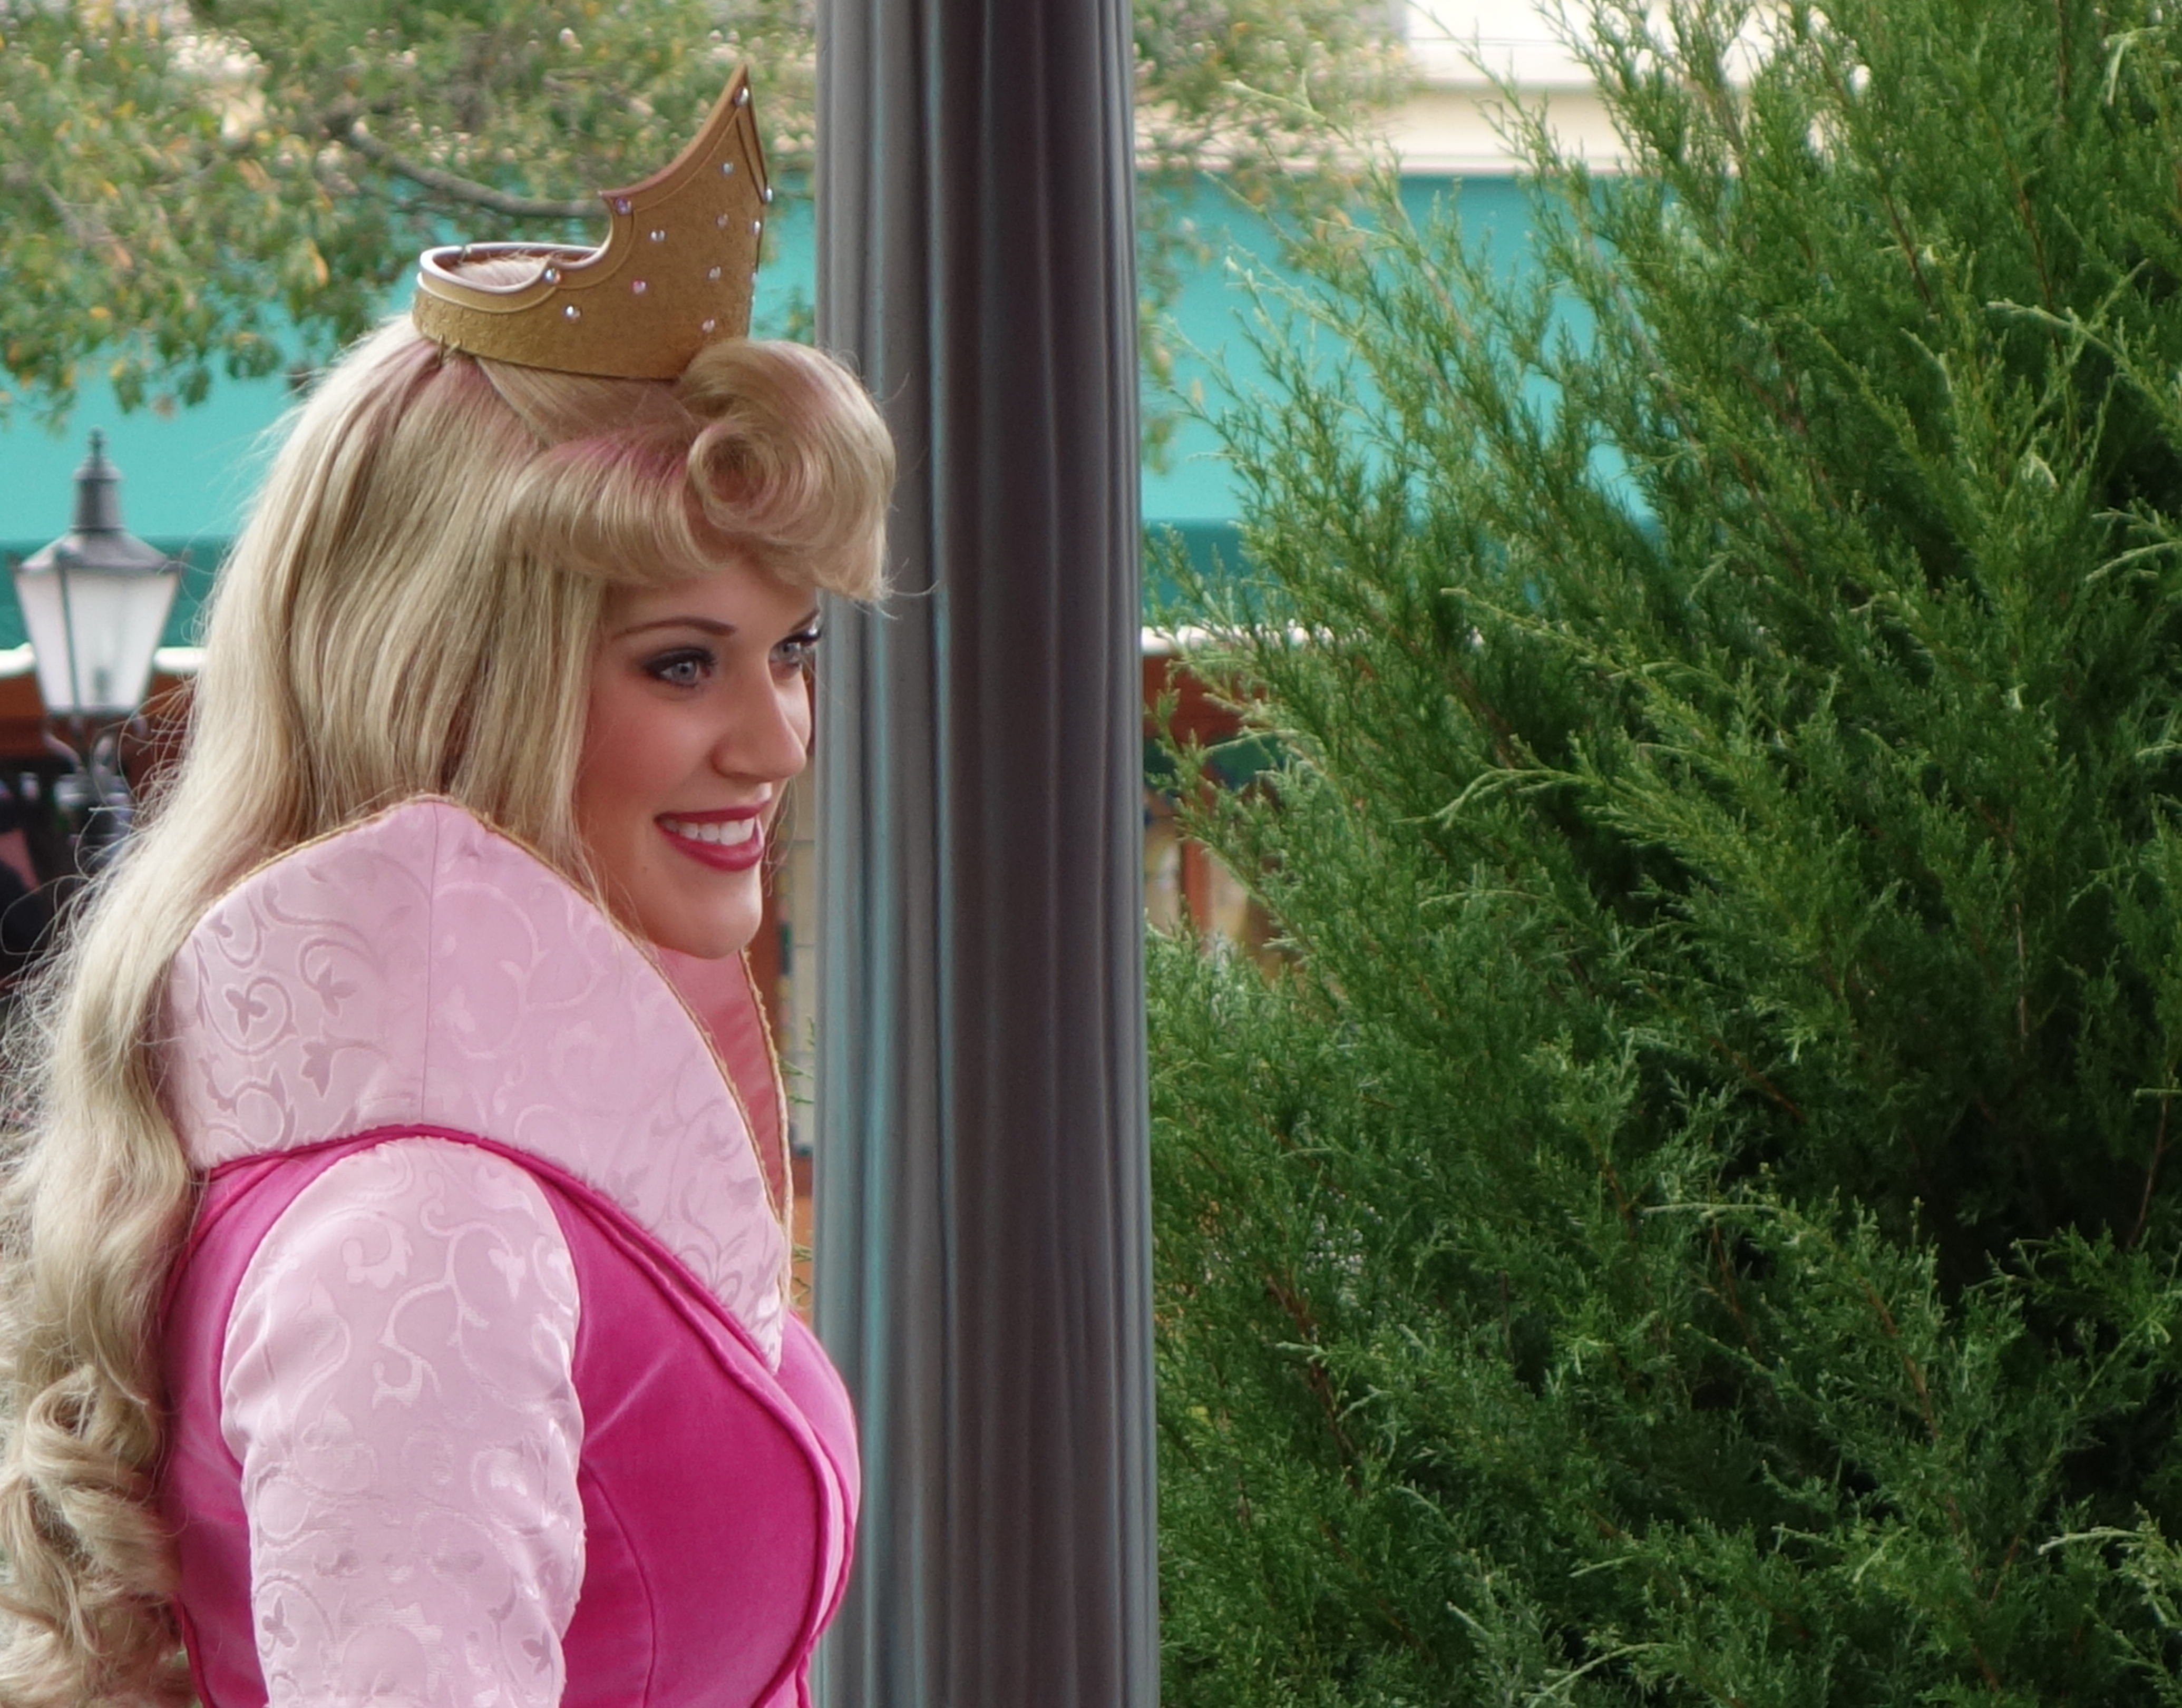 Aurora (Sleeping Beauty)  in France at Epcot 2013